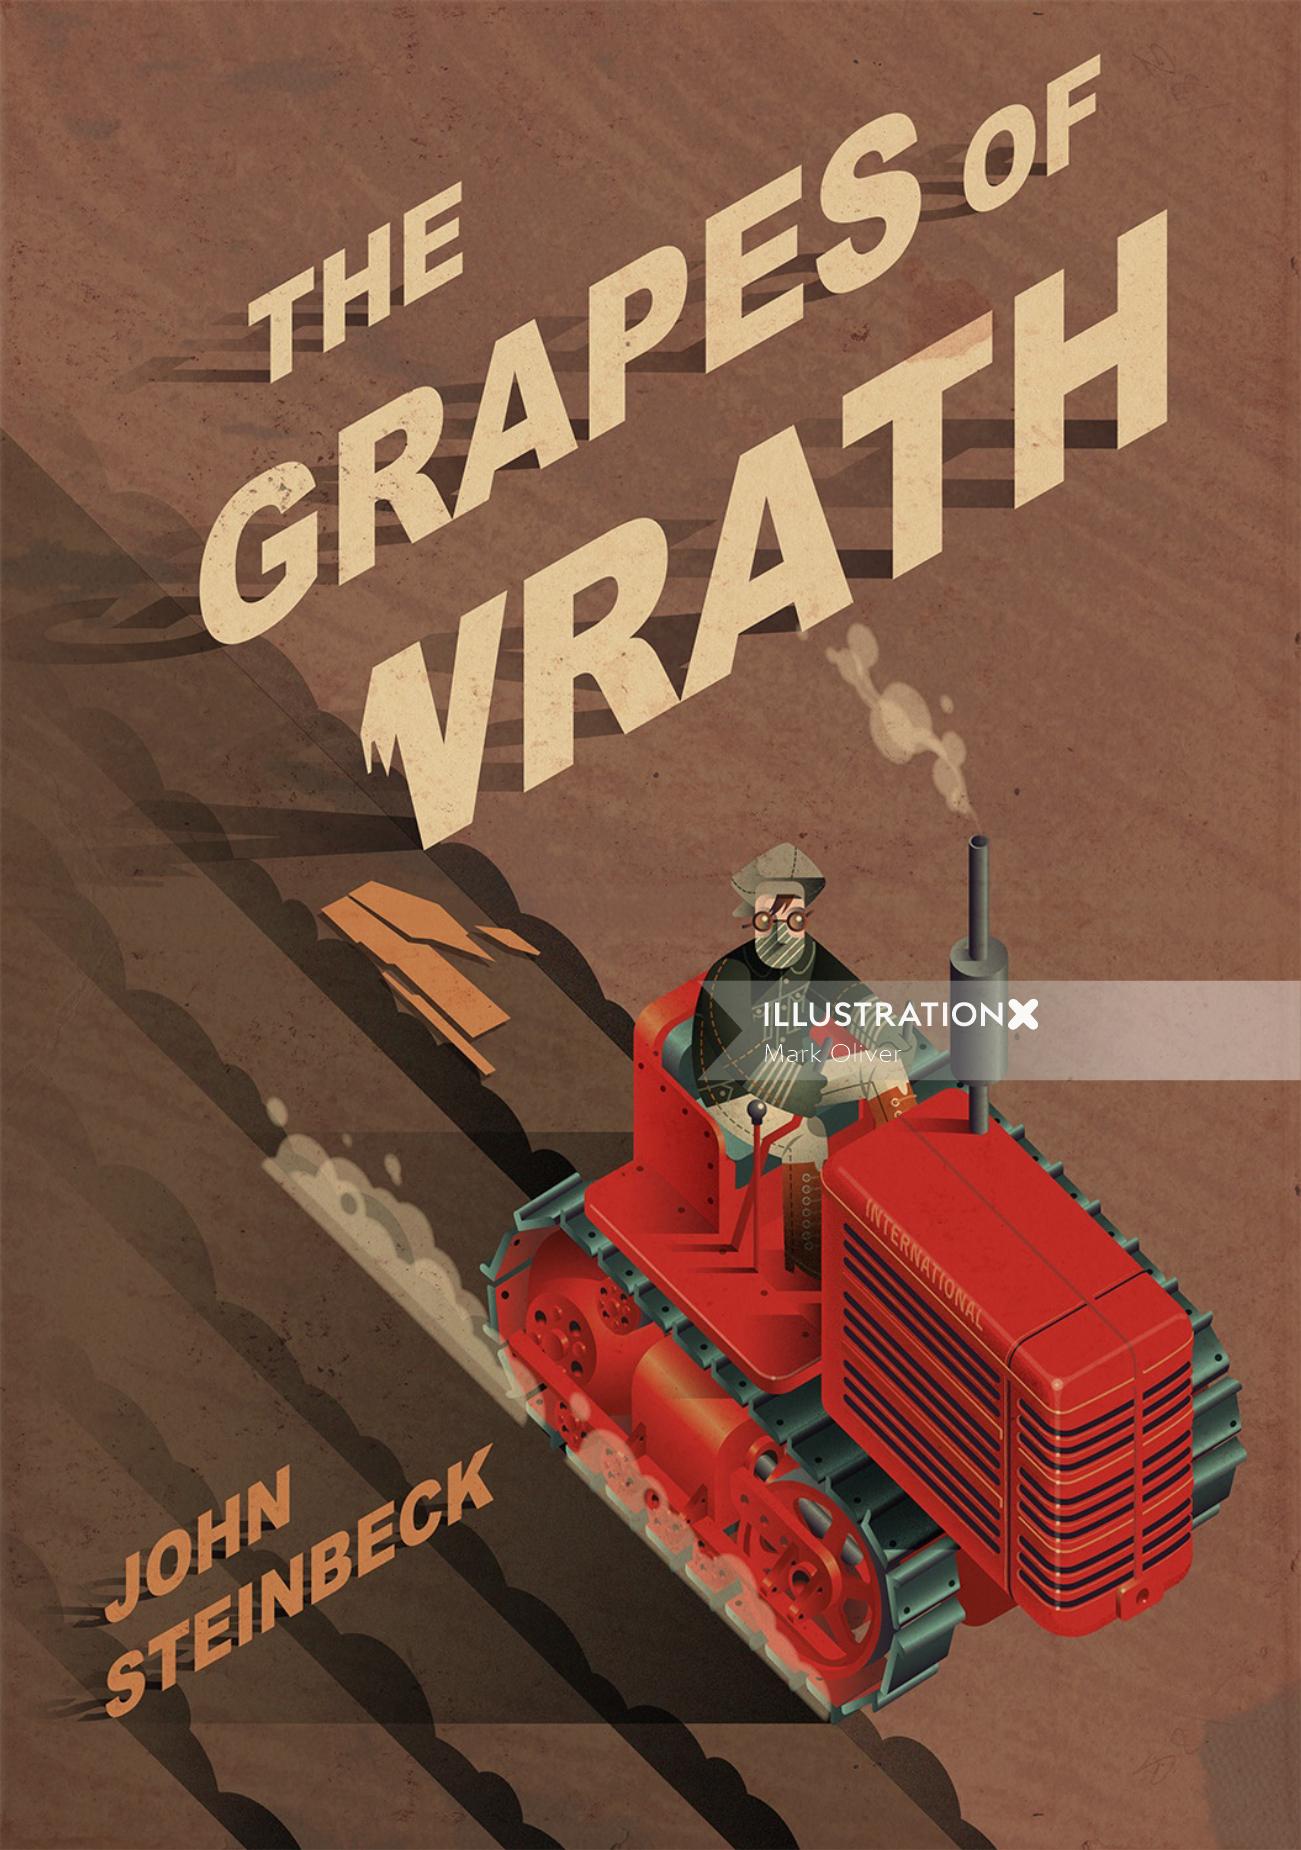 The Grapes of Wrath
